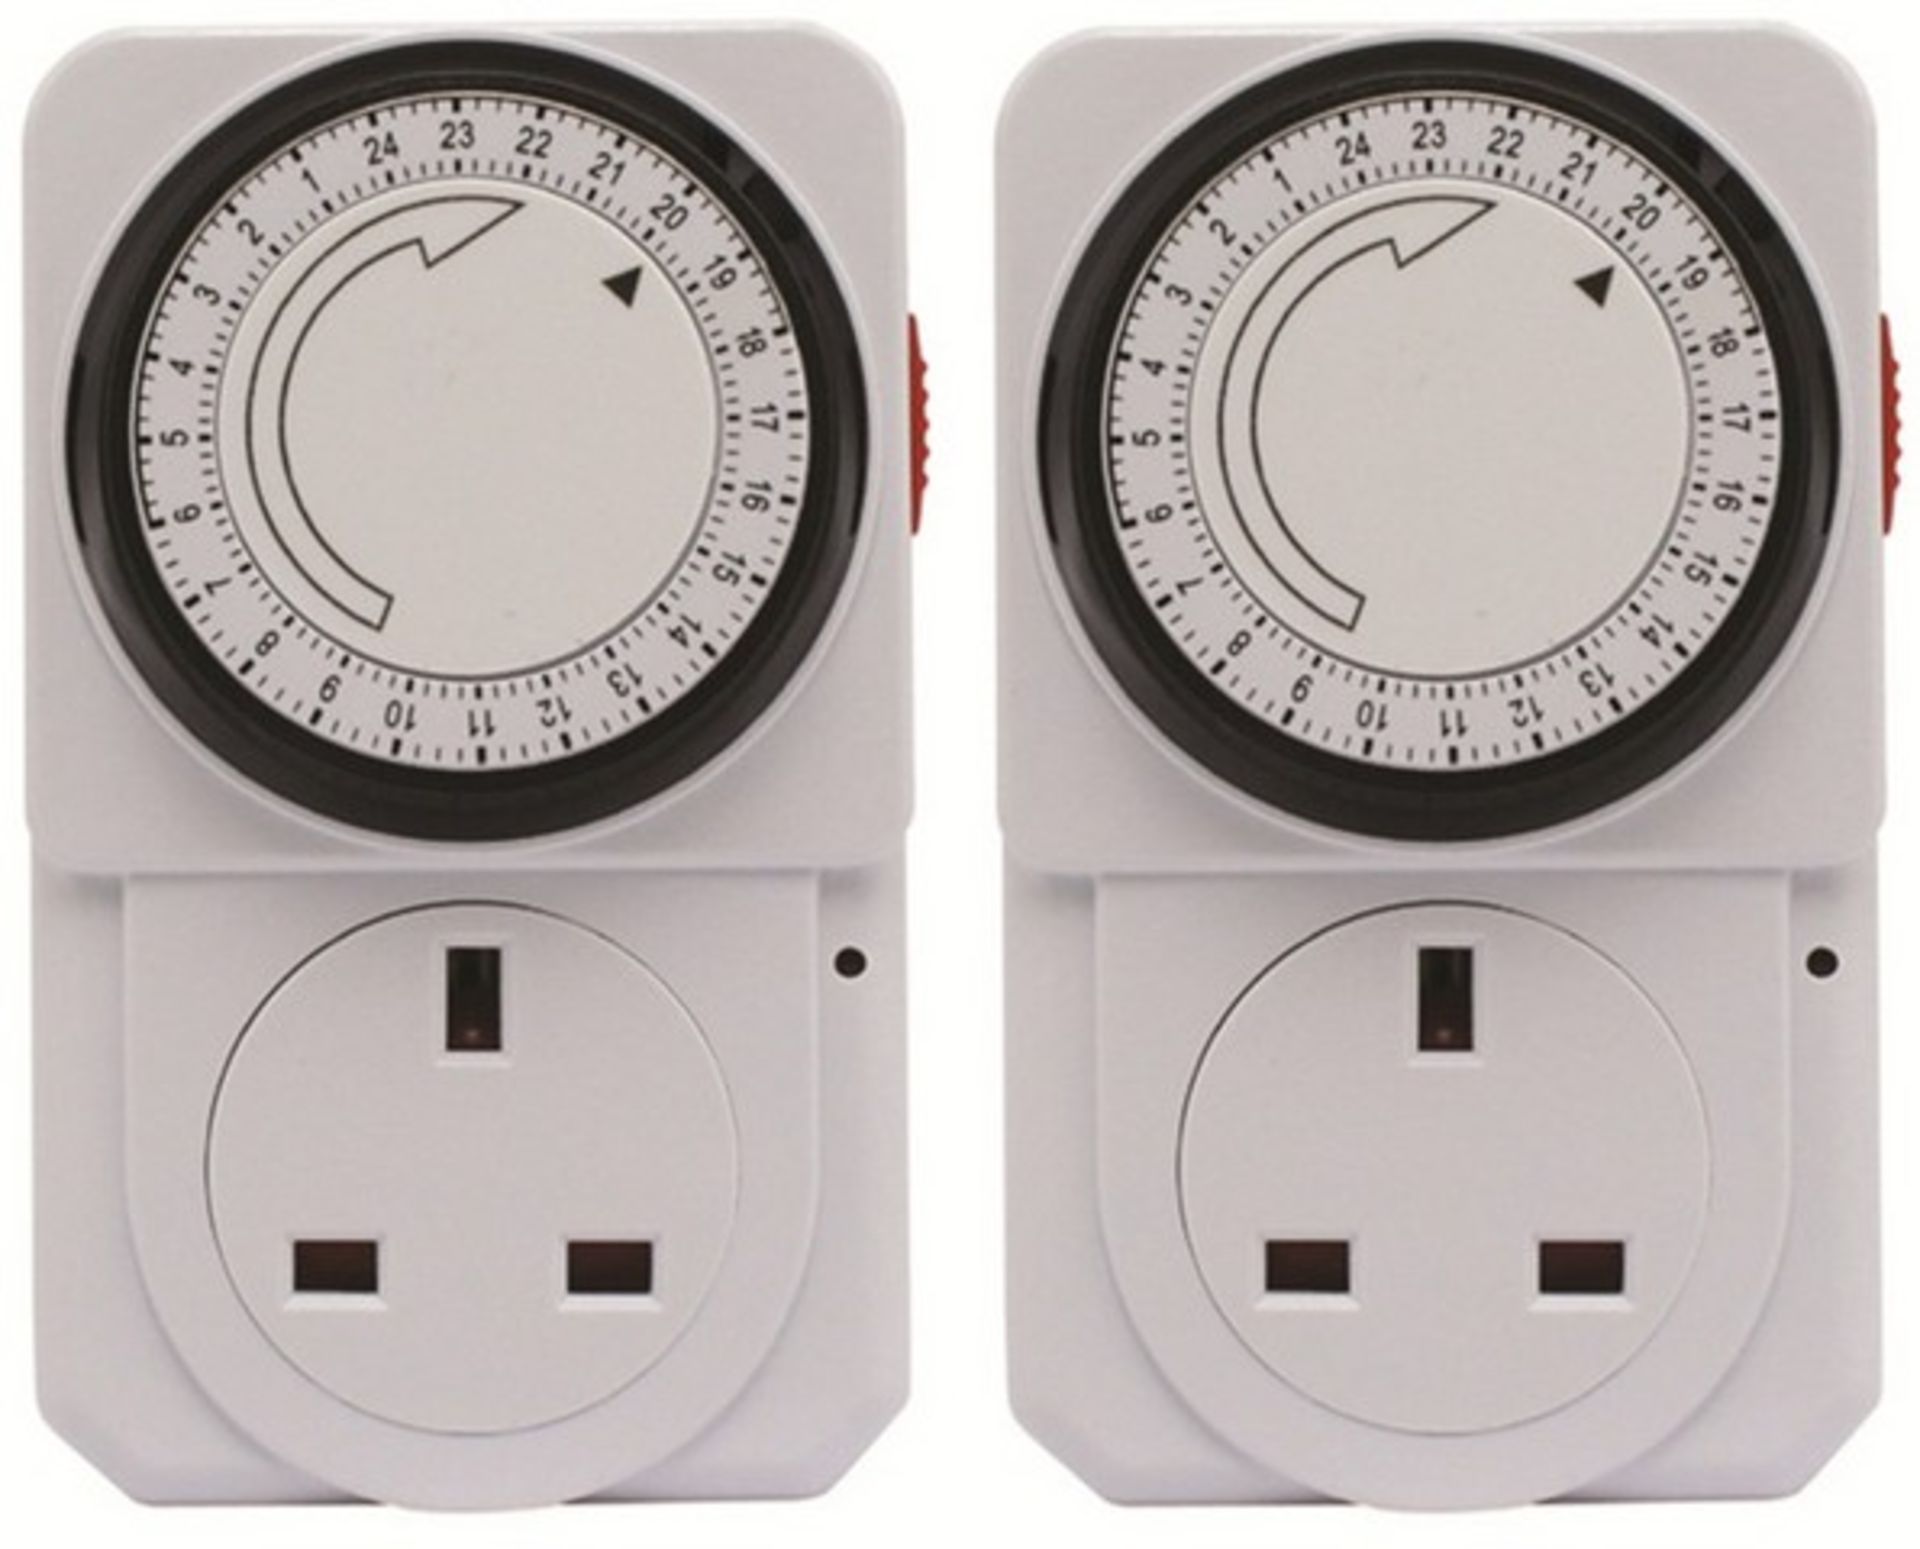 V Brand New Twin Pack Indoor Mechanical Timer Sockets With 24 Hour Timer - 48 Switches Per Day